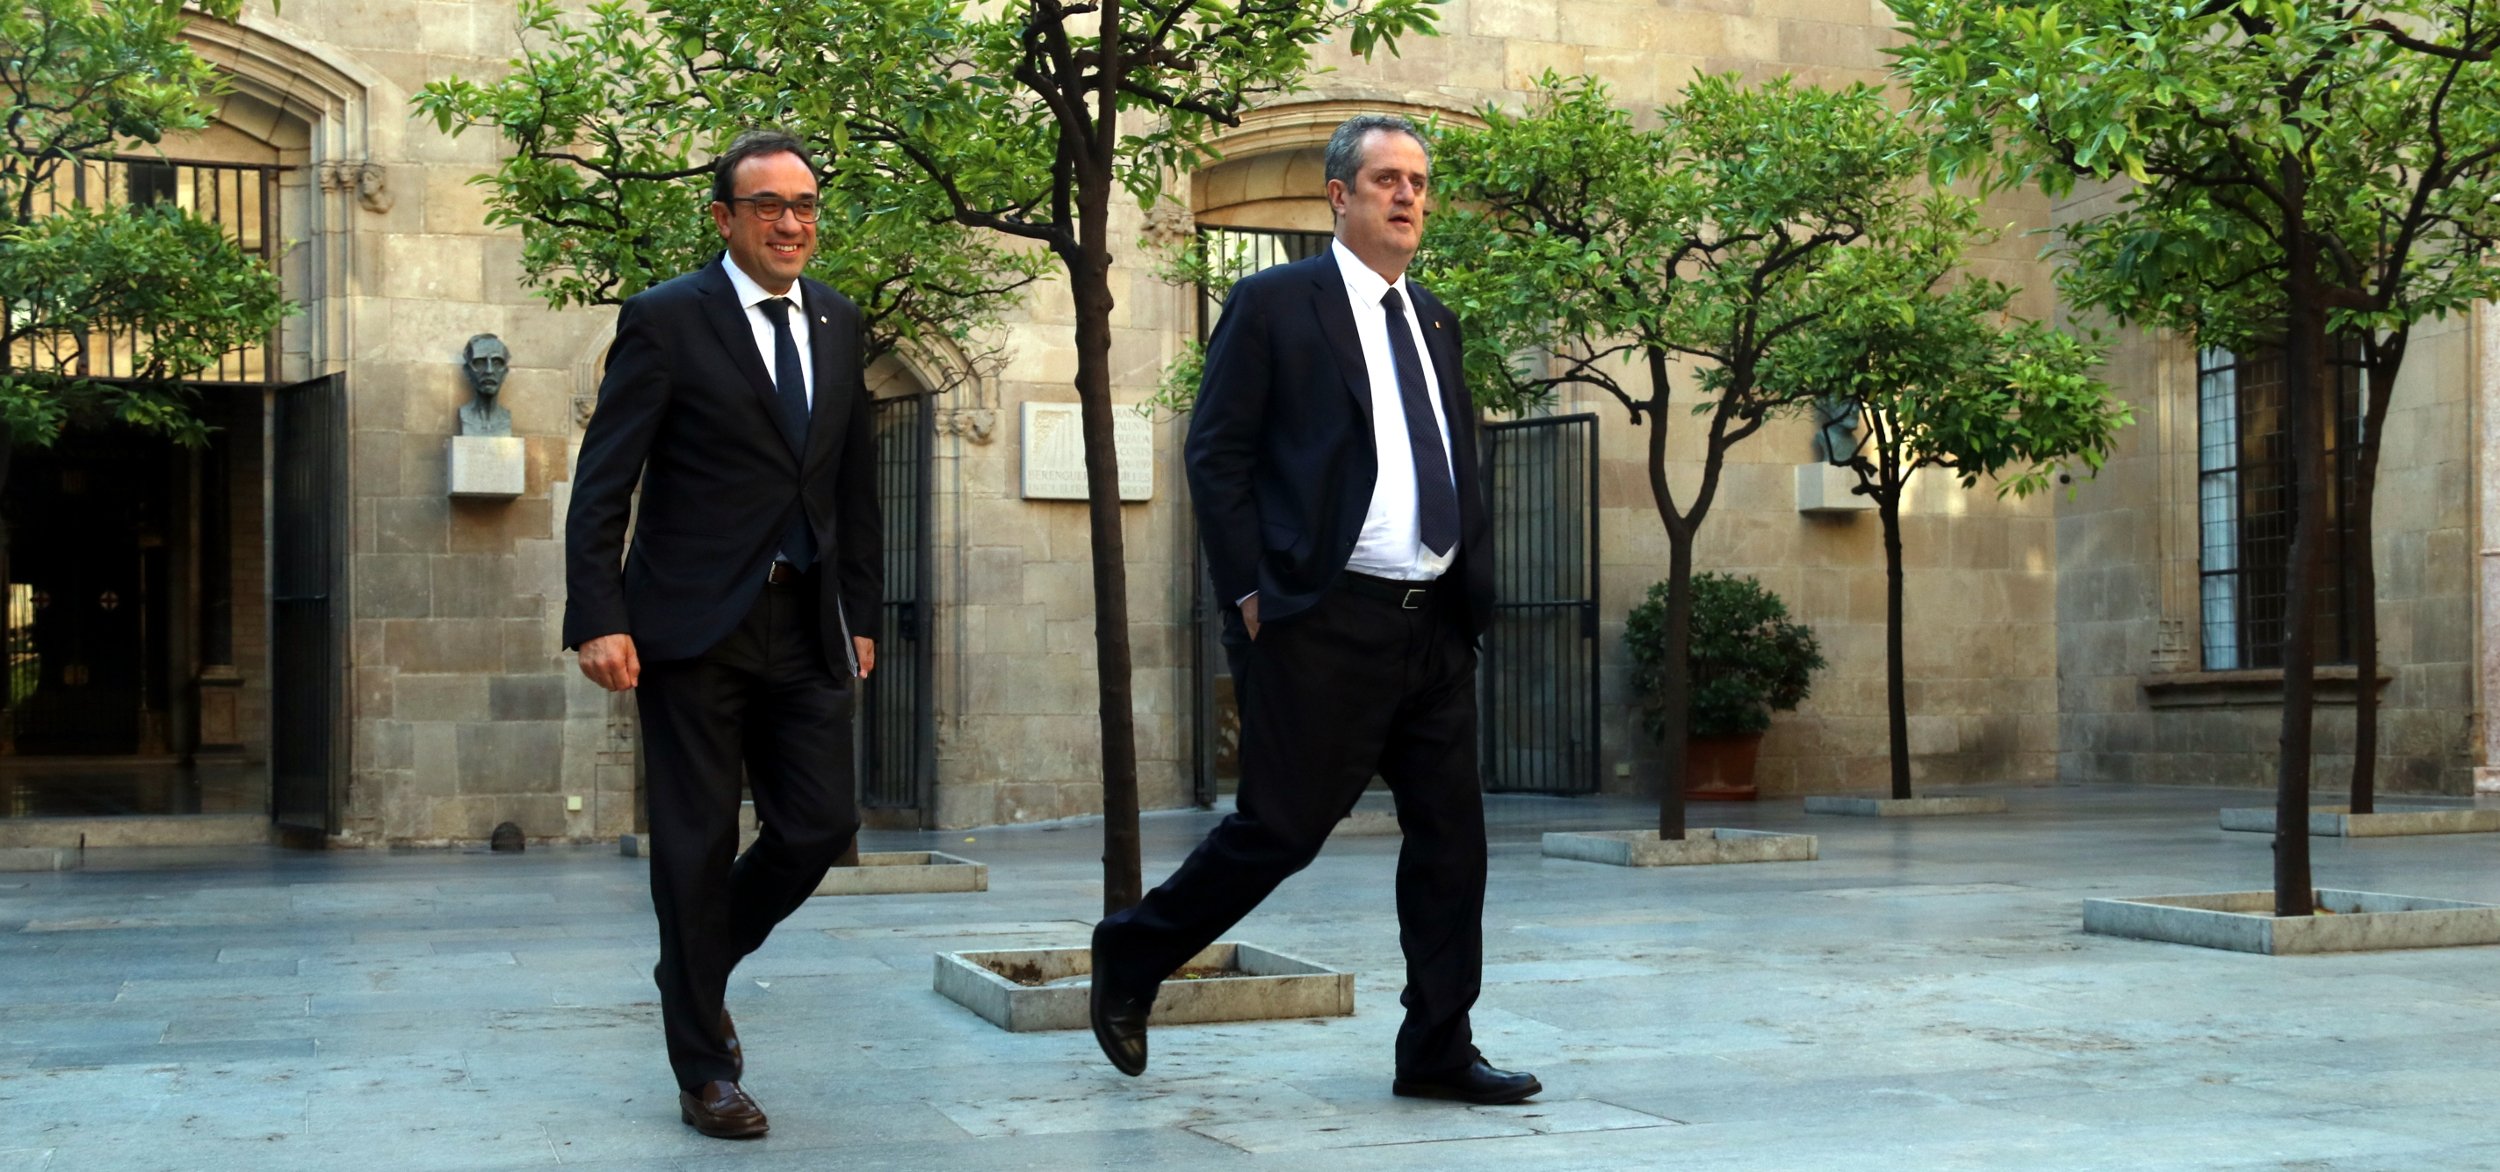 Forn and Rull join Catalan political prisoners' hunger strike